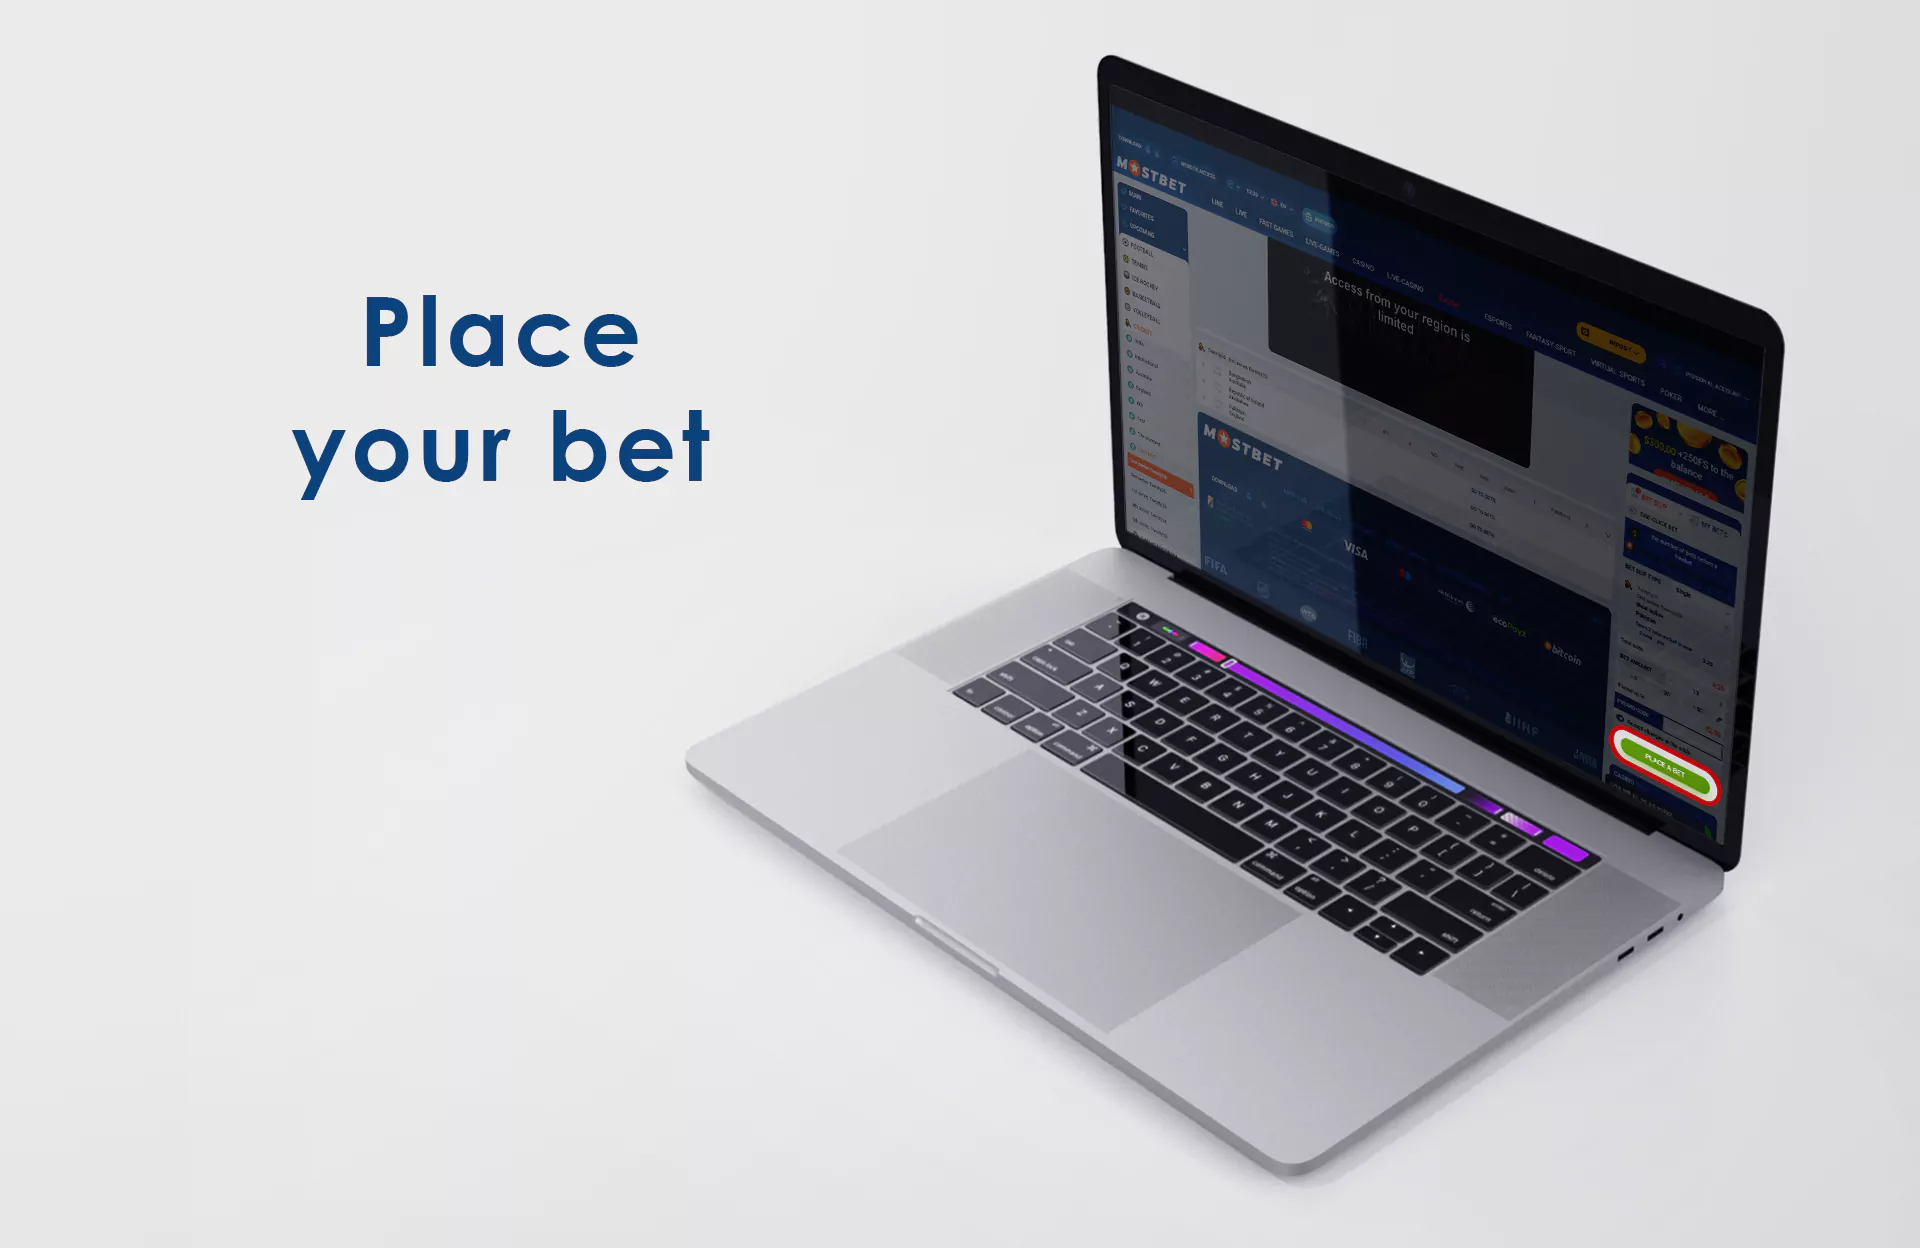 Press the 'Place a bet' button to complete.